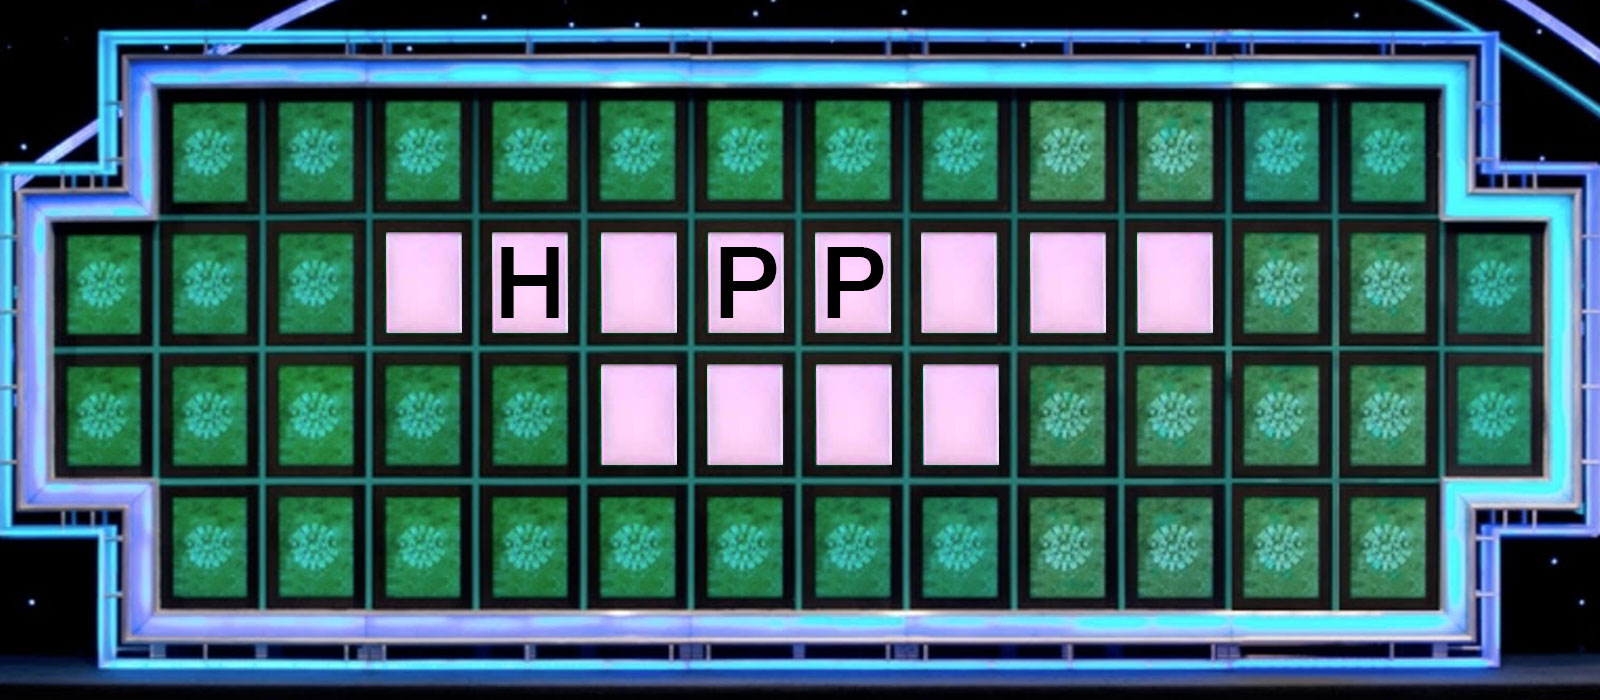 Can You Solve These Wheel of Fortune Puzzles? 318